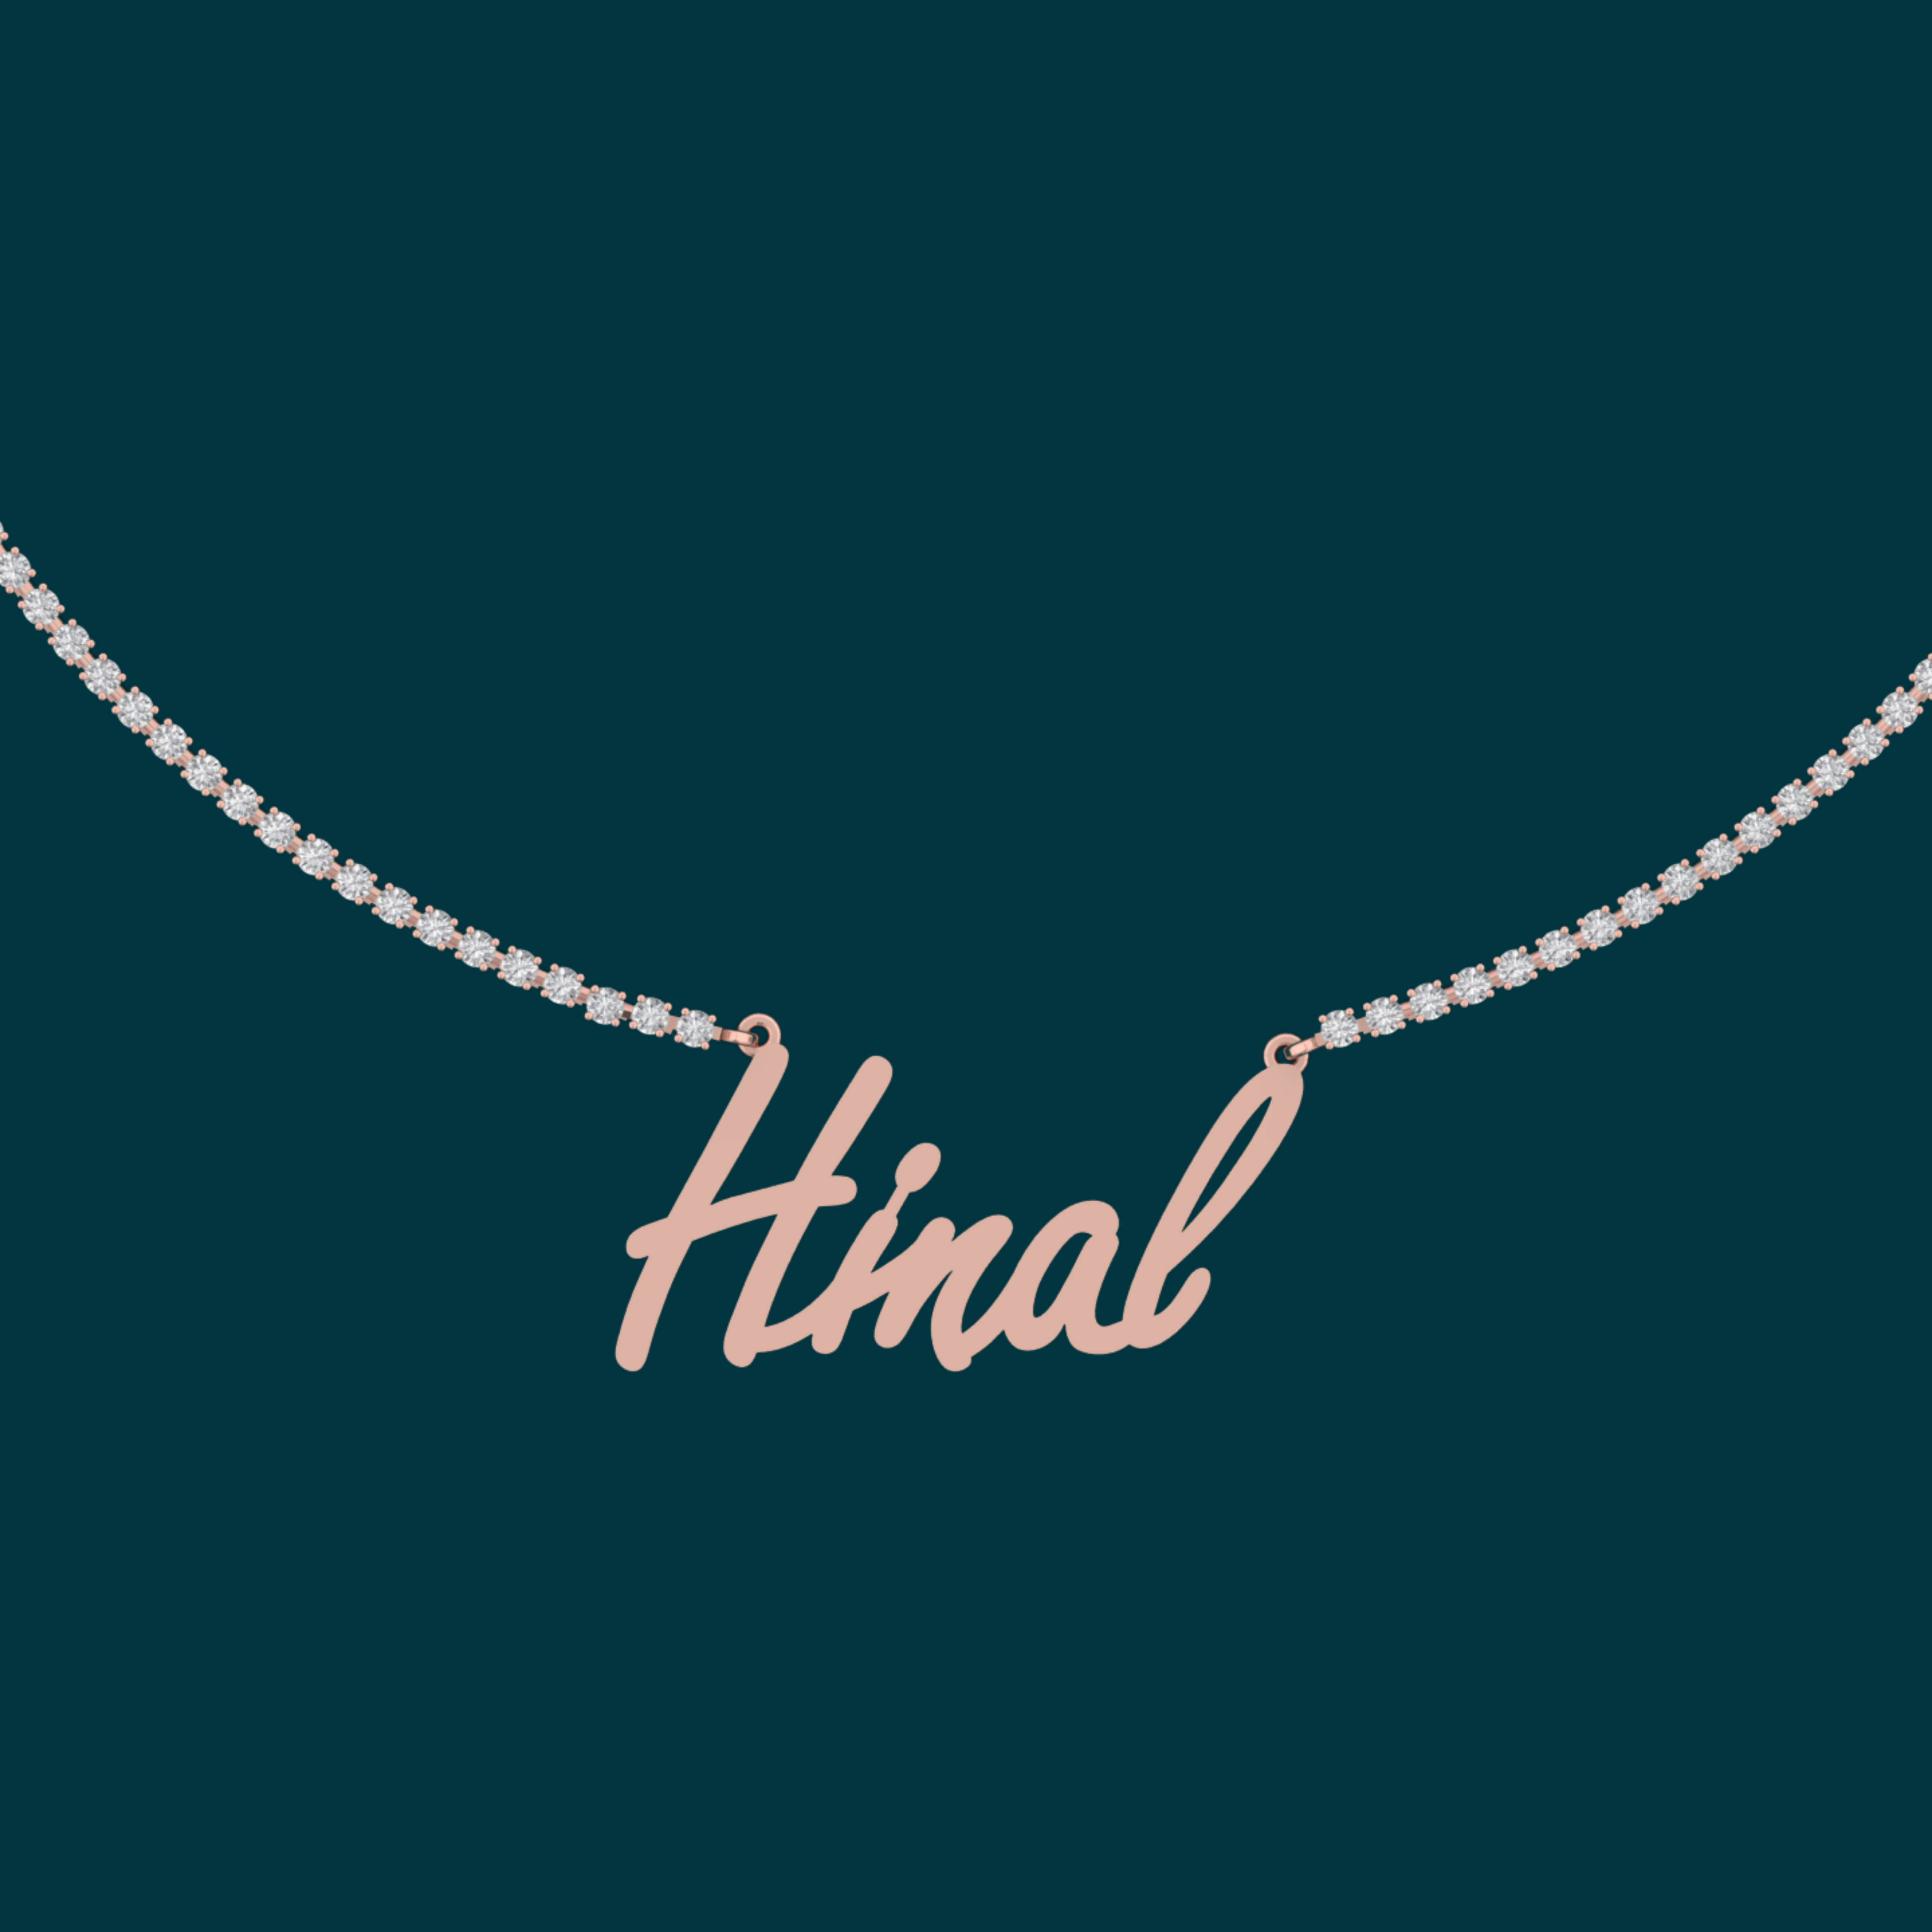 92.5 sterling silver custom hubby/ baby name Customized Pendant with chain/ Moissanite Handmade Special Name band /long distance promise gift for love/ Special one person name Pendant with chain/ minimalist pendant chain